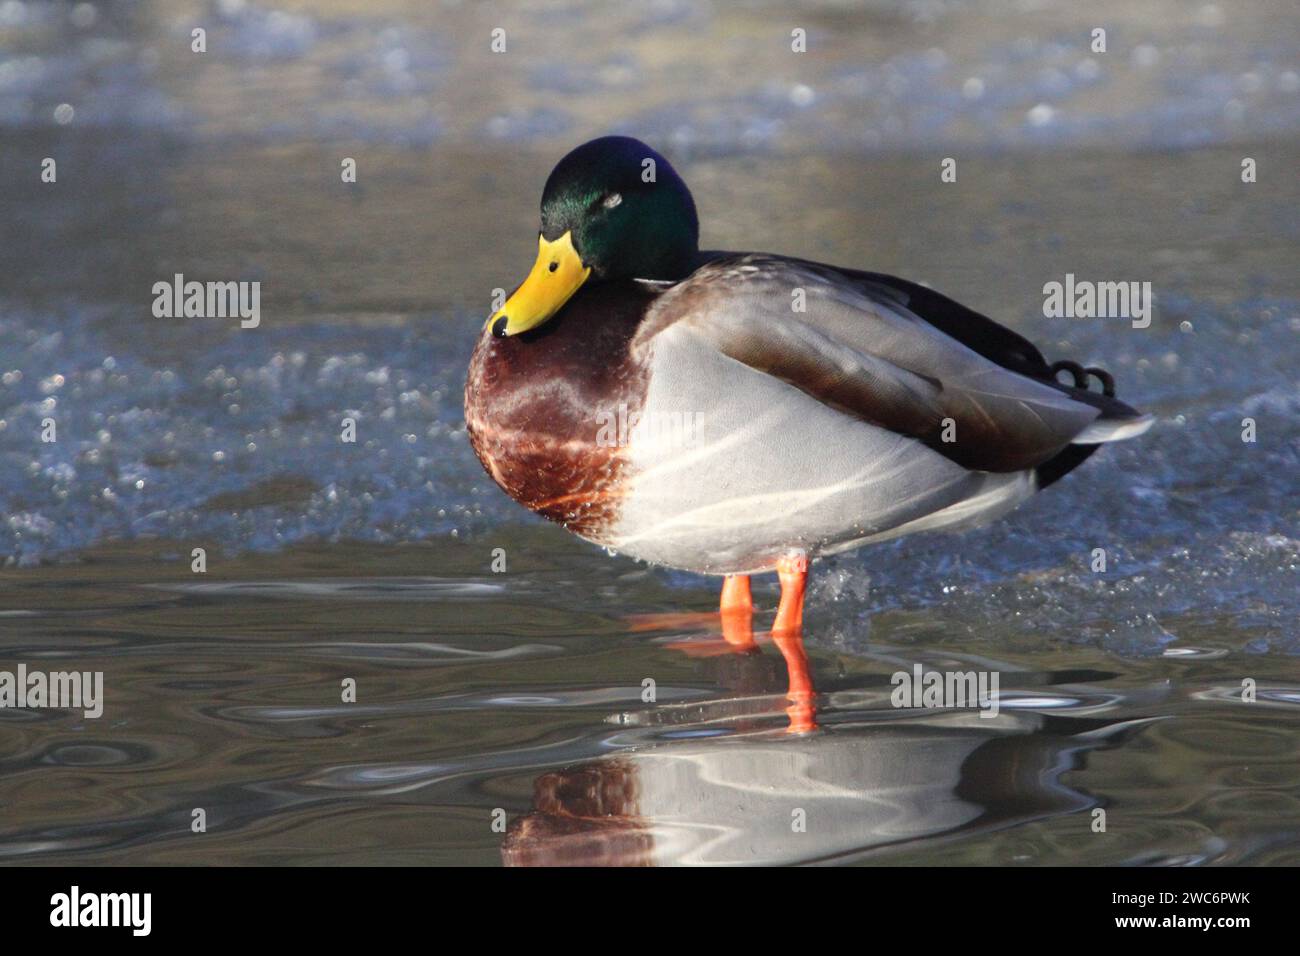 The mallard or wild duck (Anas platyrhynchos) is a dabbling duck which breeds throughout the temperate and subtropical Americas, Eurasia, and North Af Stock Photo